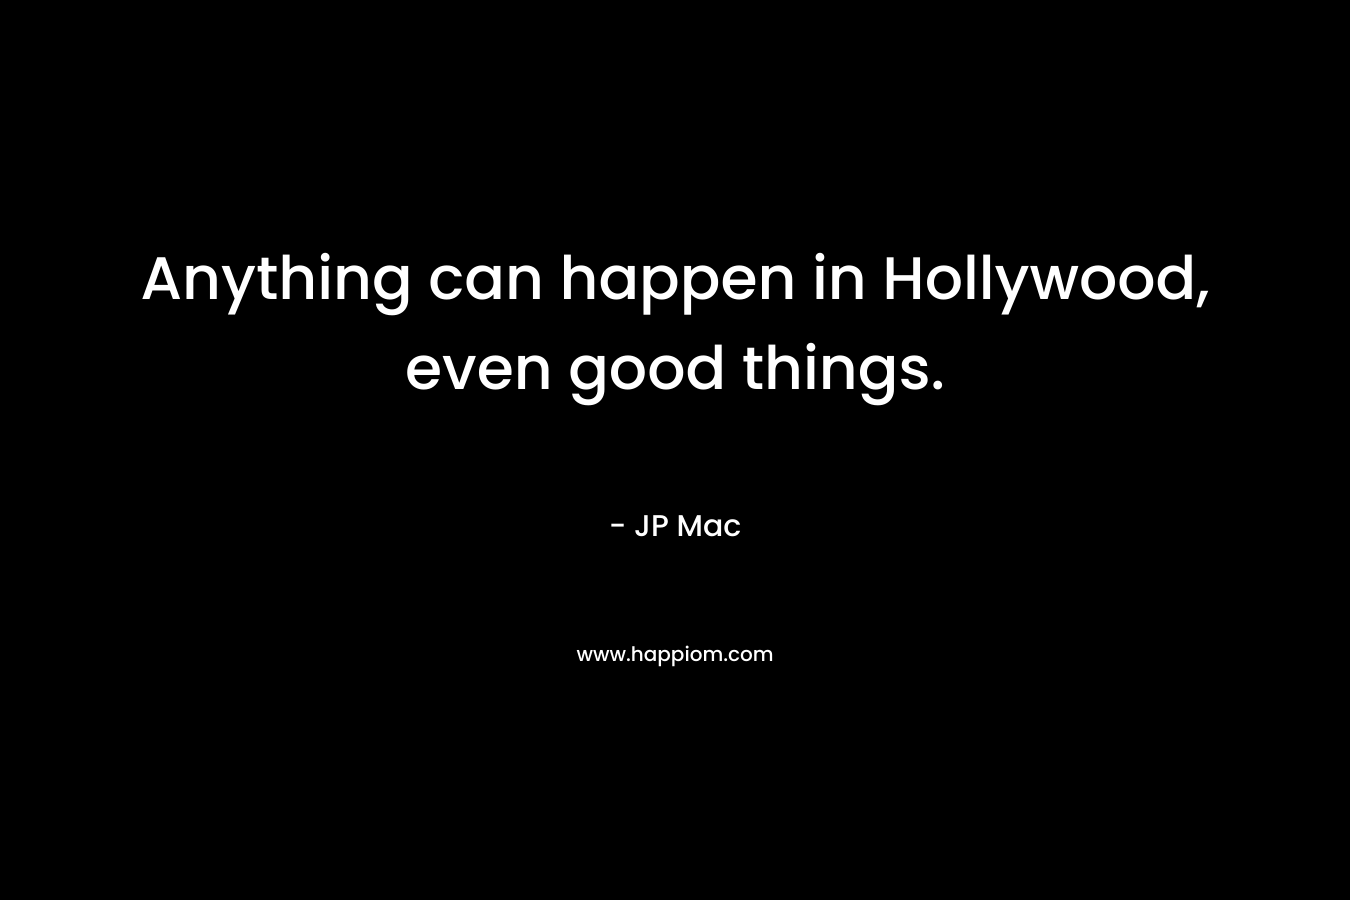 Anything can happen in Hollywood, even good things. – JP Mac